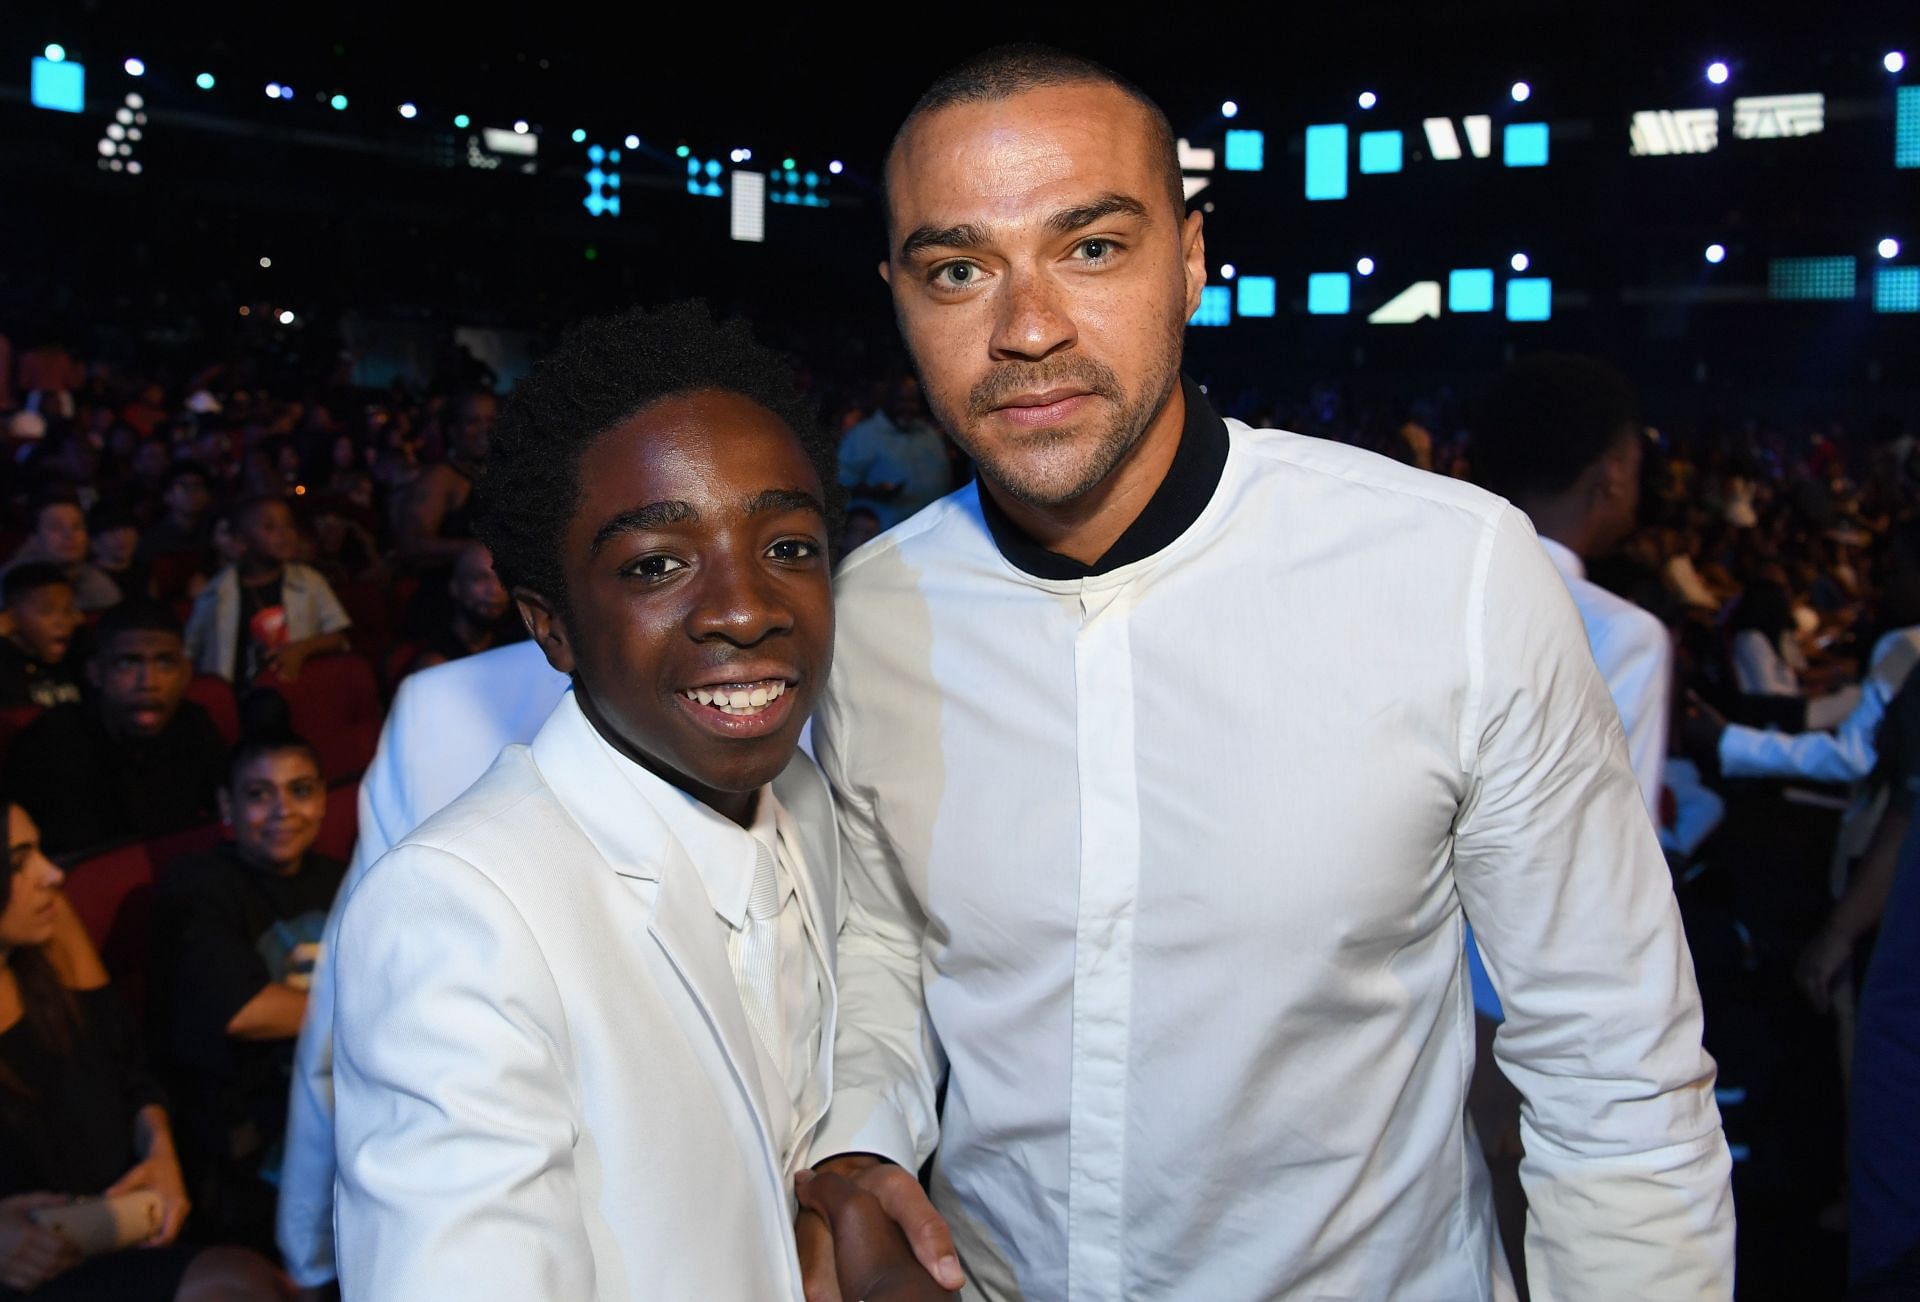 Caleb McLaughlin (L) and Jesse Williams (R) onstage at 2017 BET Awards at Microsoft Theater on June 25, 2017 in Los Angeles, California. (Photo by Paras Griffin/Getty Images)